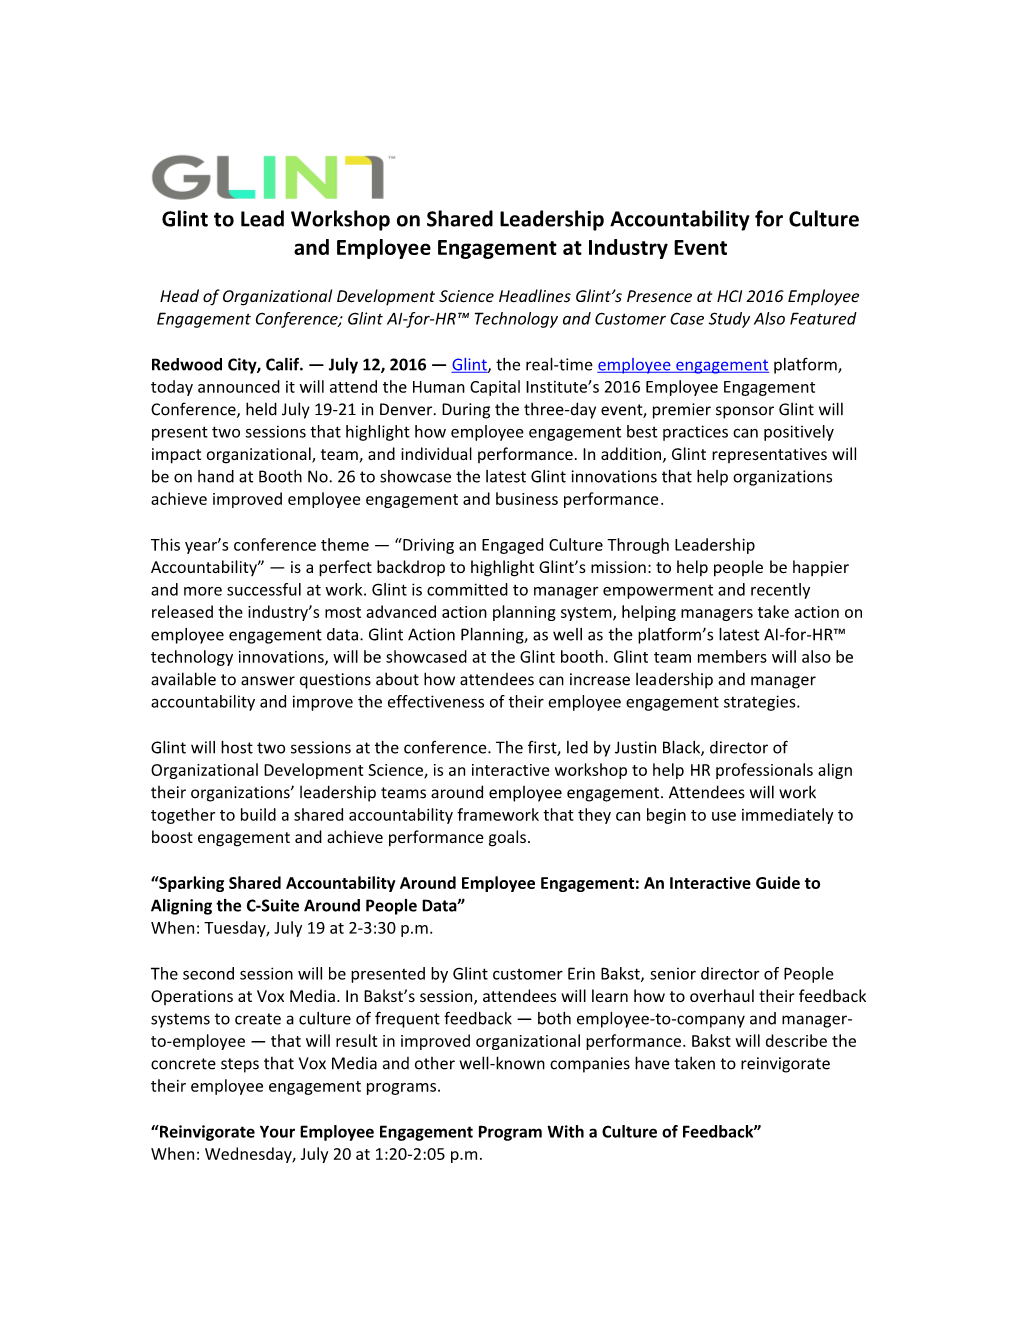 Glint to Lead Workshop on Shared Leadership Accountability for Culture and Employee Engagement